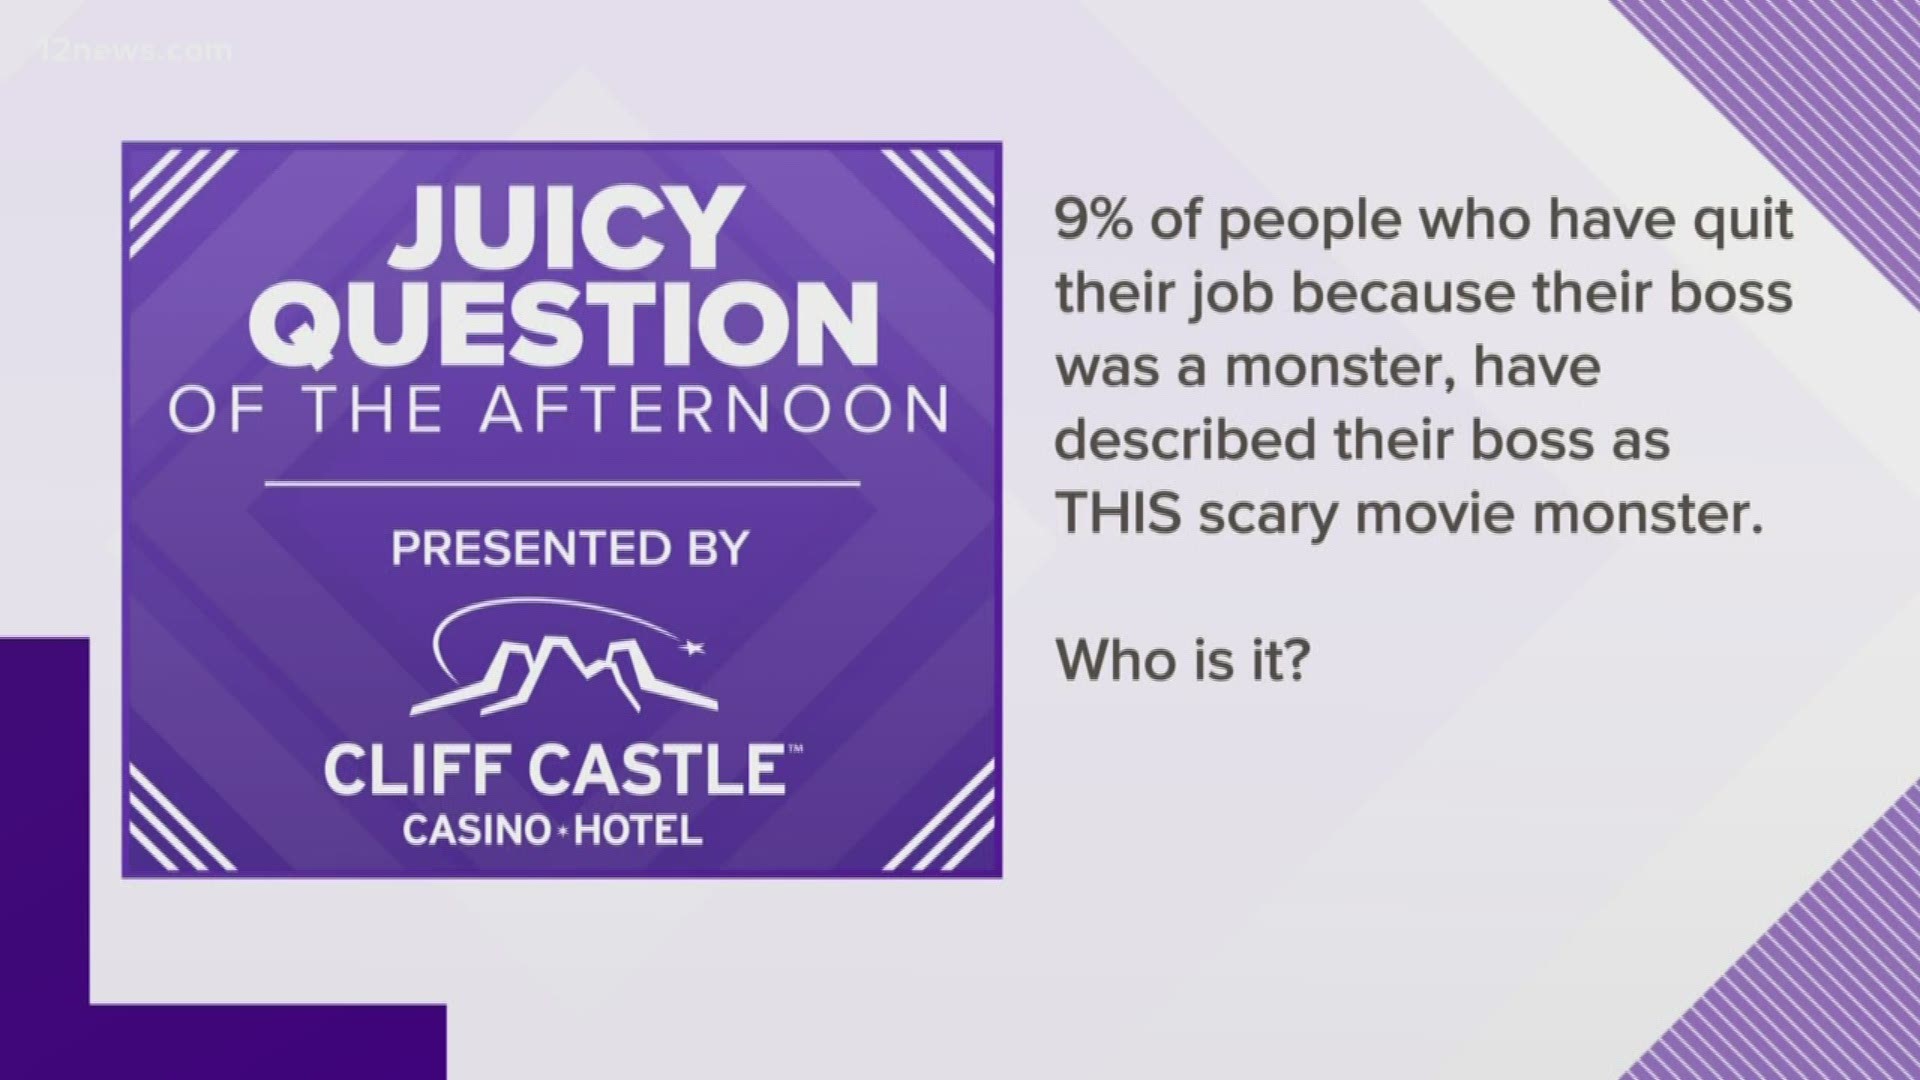 9% of people who have quit their job because their boss was a monster, have described their boss as THIS scary movie monster. Who is it?